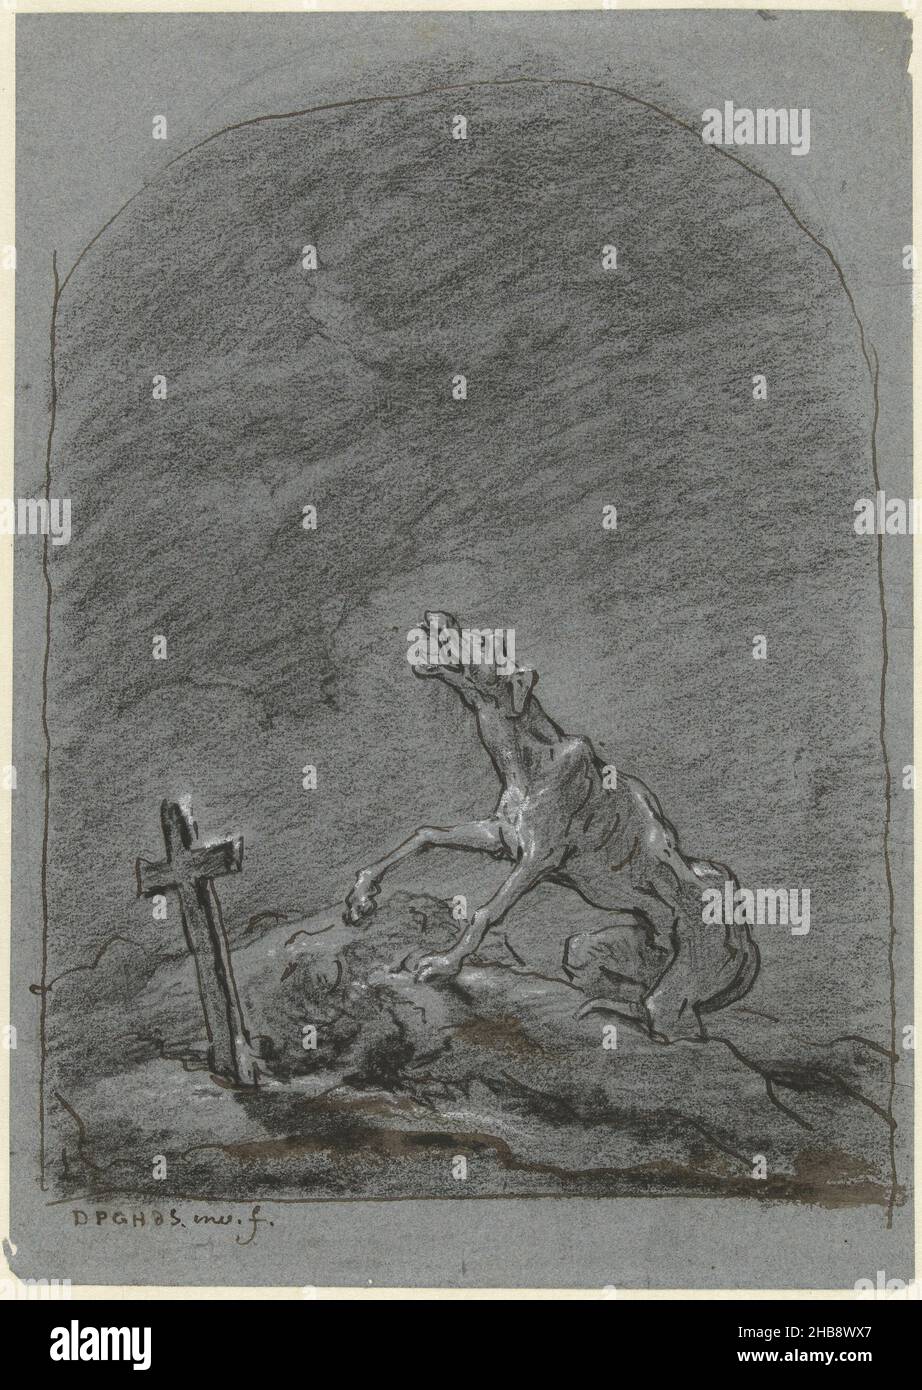 Whining dog at the grave of its master, draughtsman: David Pièrre Giottino Humbert de Superville, 1780 - 1849, paper, ink, pen, height 232 mm × width 165 mm Stock Photo